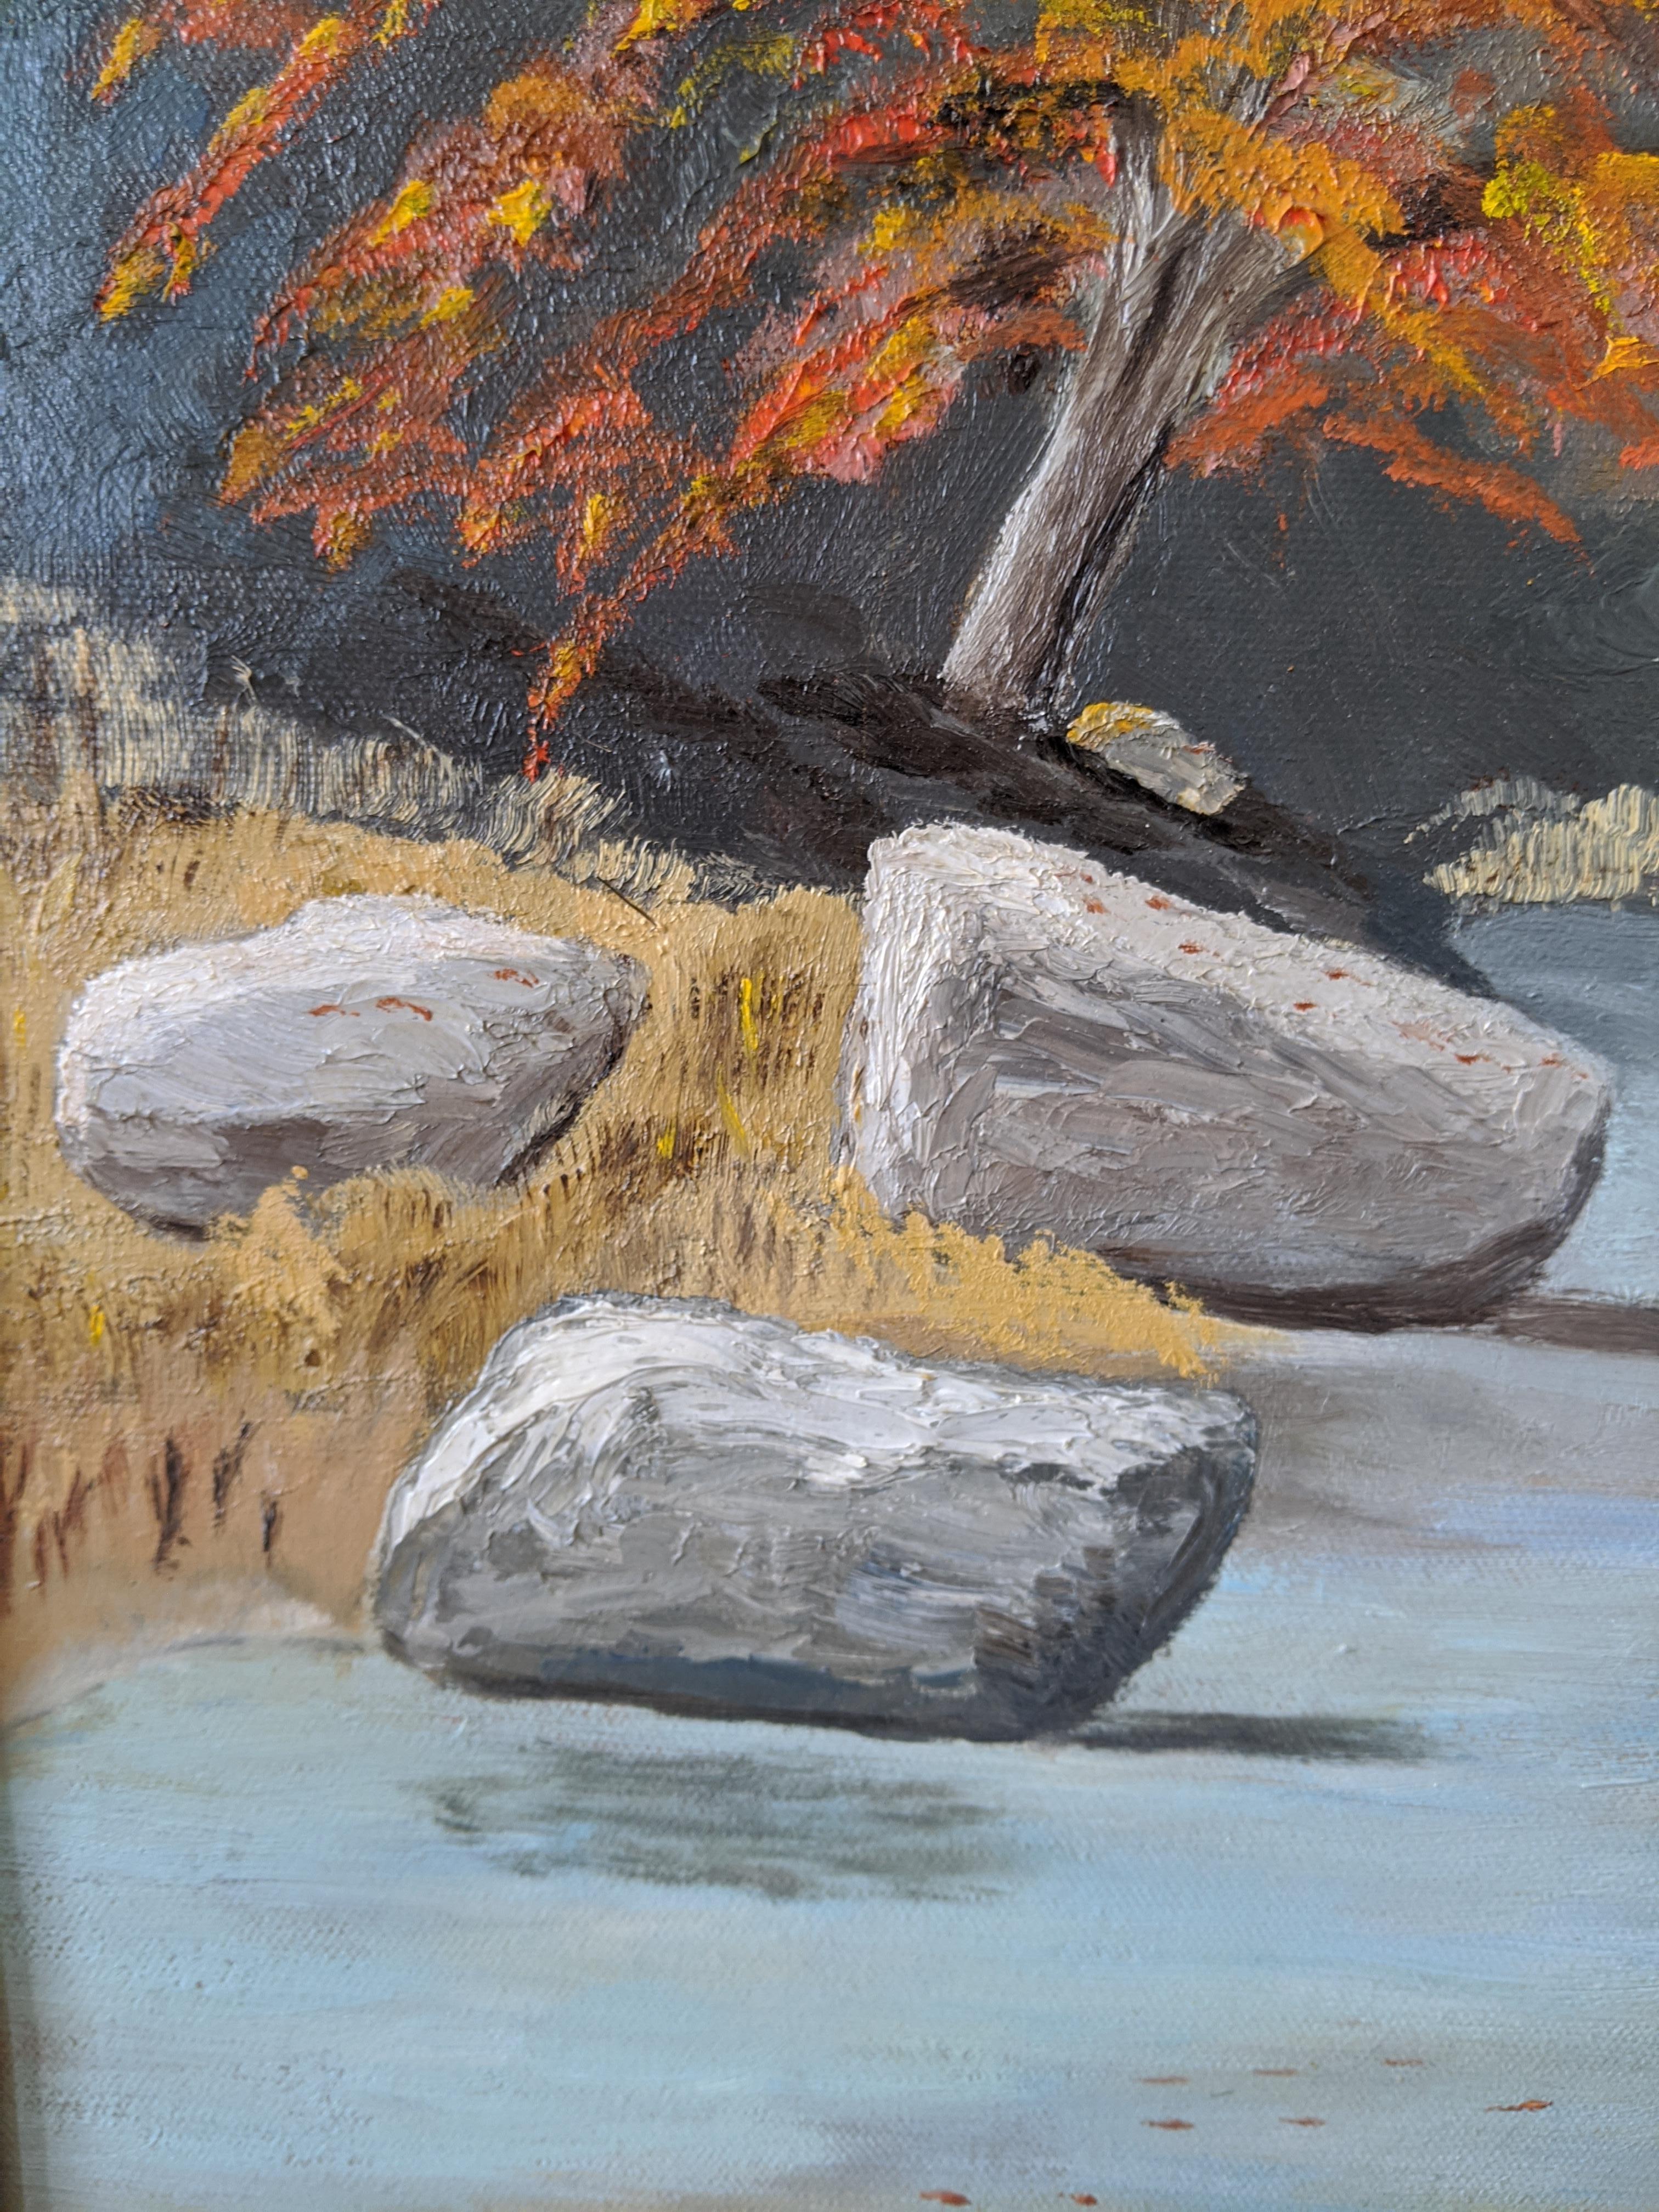 This oil on canvas painting depicts Cibolo Creek in Texas, and shows a section with a beautiful stretch of light blue water and a vibrant burnt orange tree. The composition is balanced and the reflections in the water create a sense of tranquility.